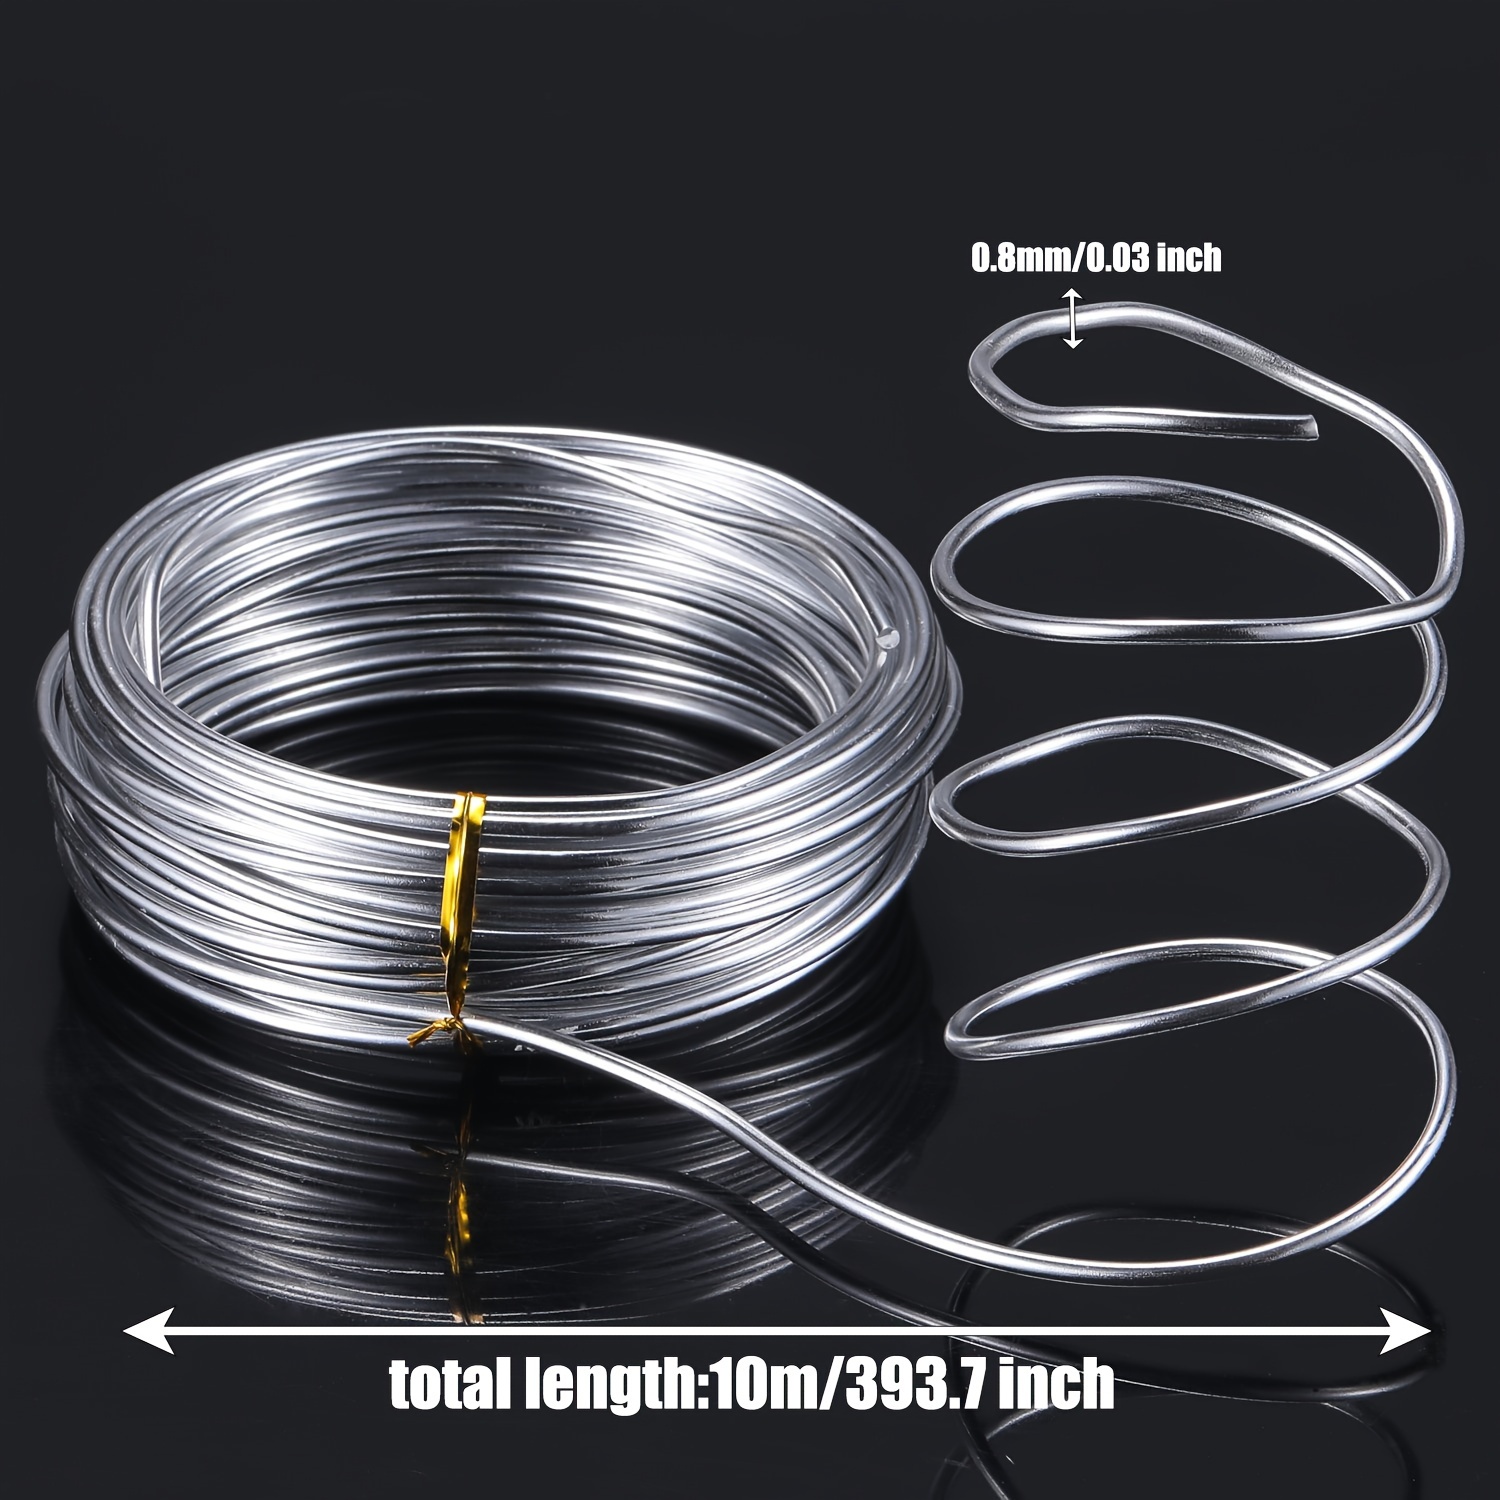  18 Gauge Aluminum Craft Wire, 165 Feet 1mm Bendable Metal Wire  for Jewelry Making, Sculpting, Modelling, Wreath Making, Floral Making,  Beading, Wire Wrapping (Black)